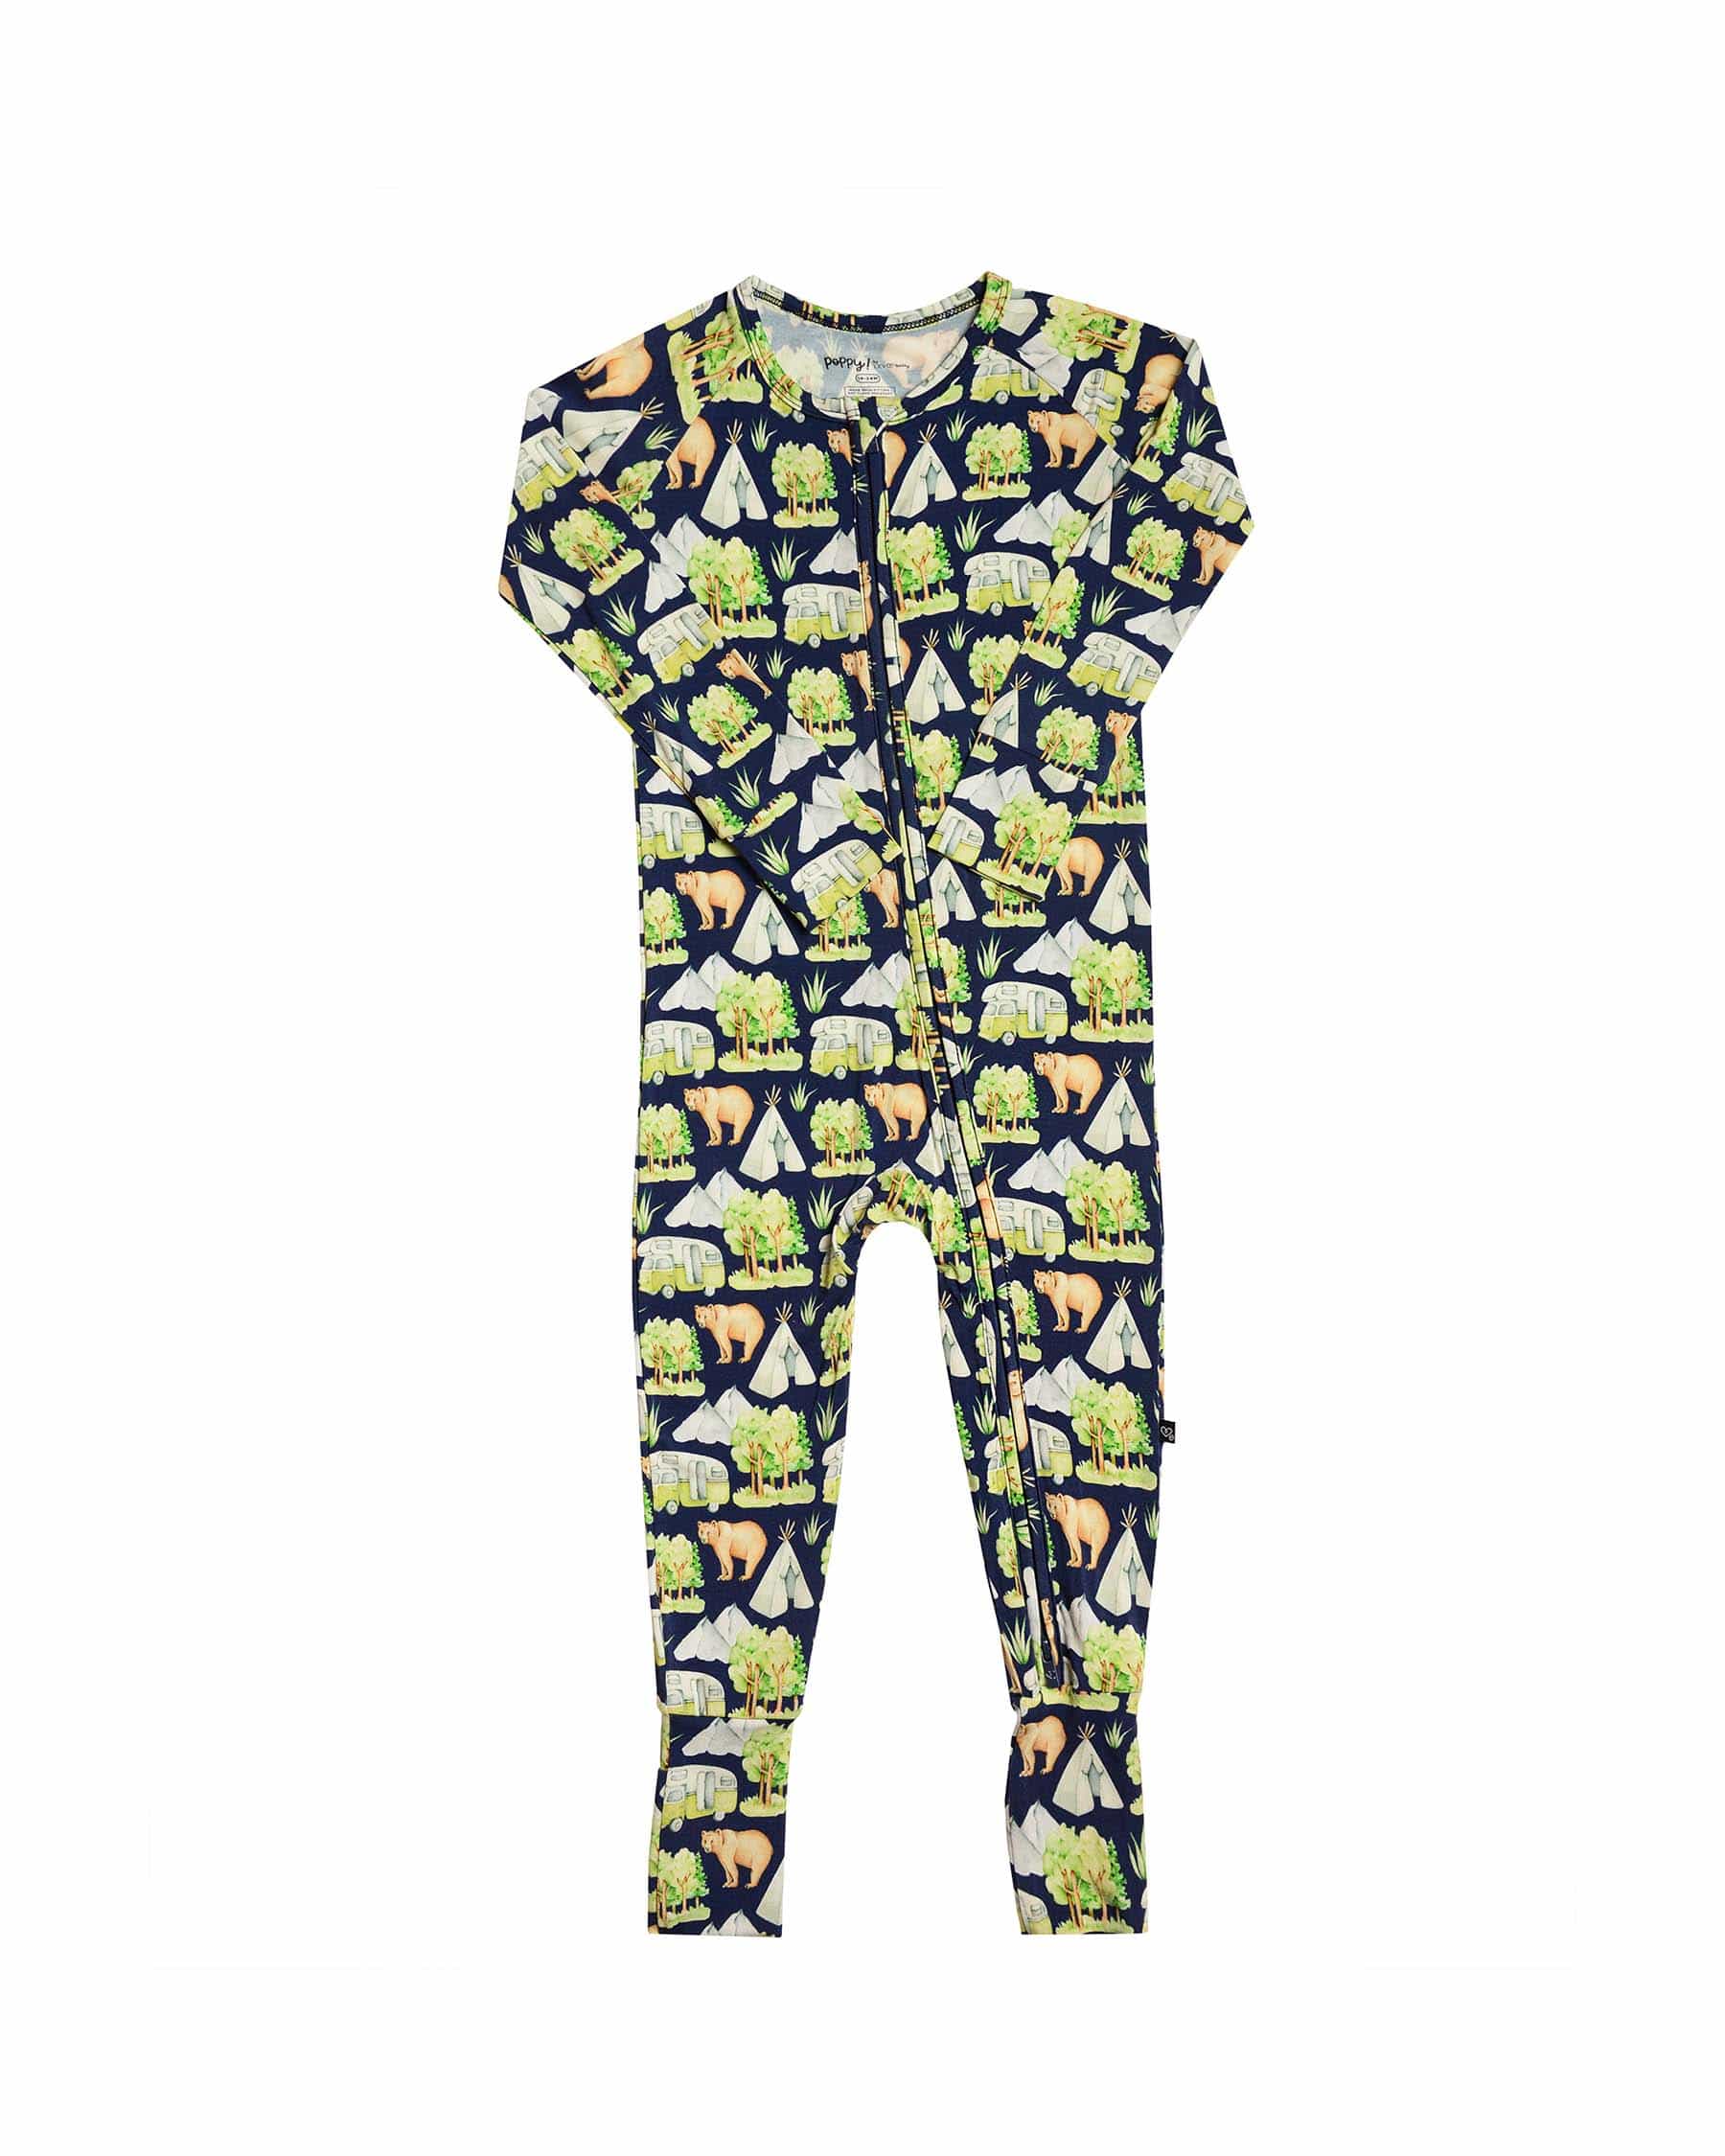 Camping 'Poppy': The Convertible Romper